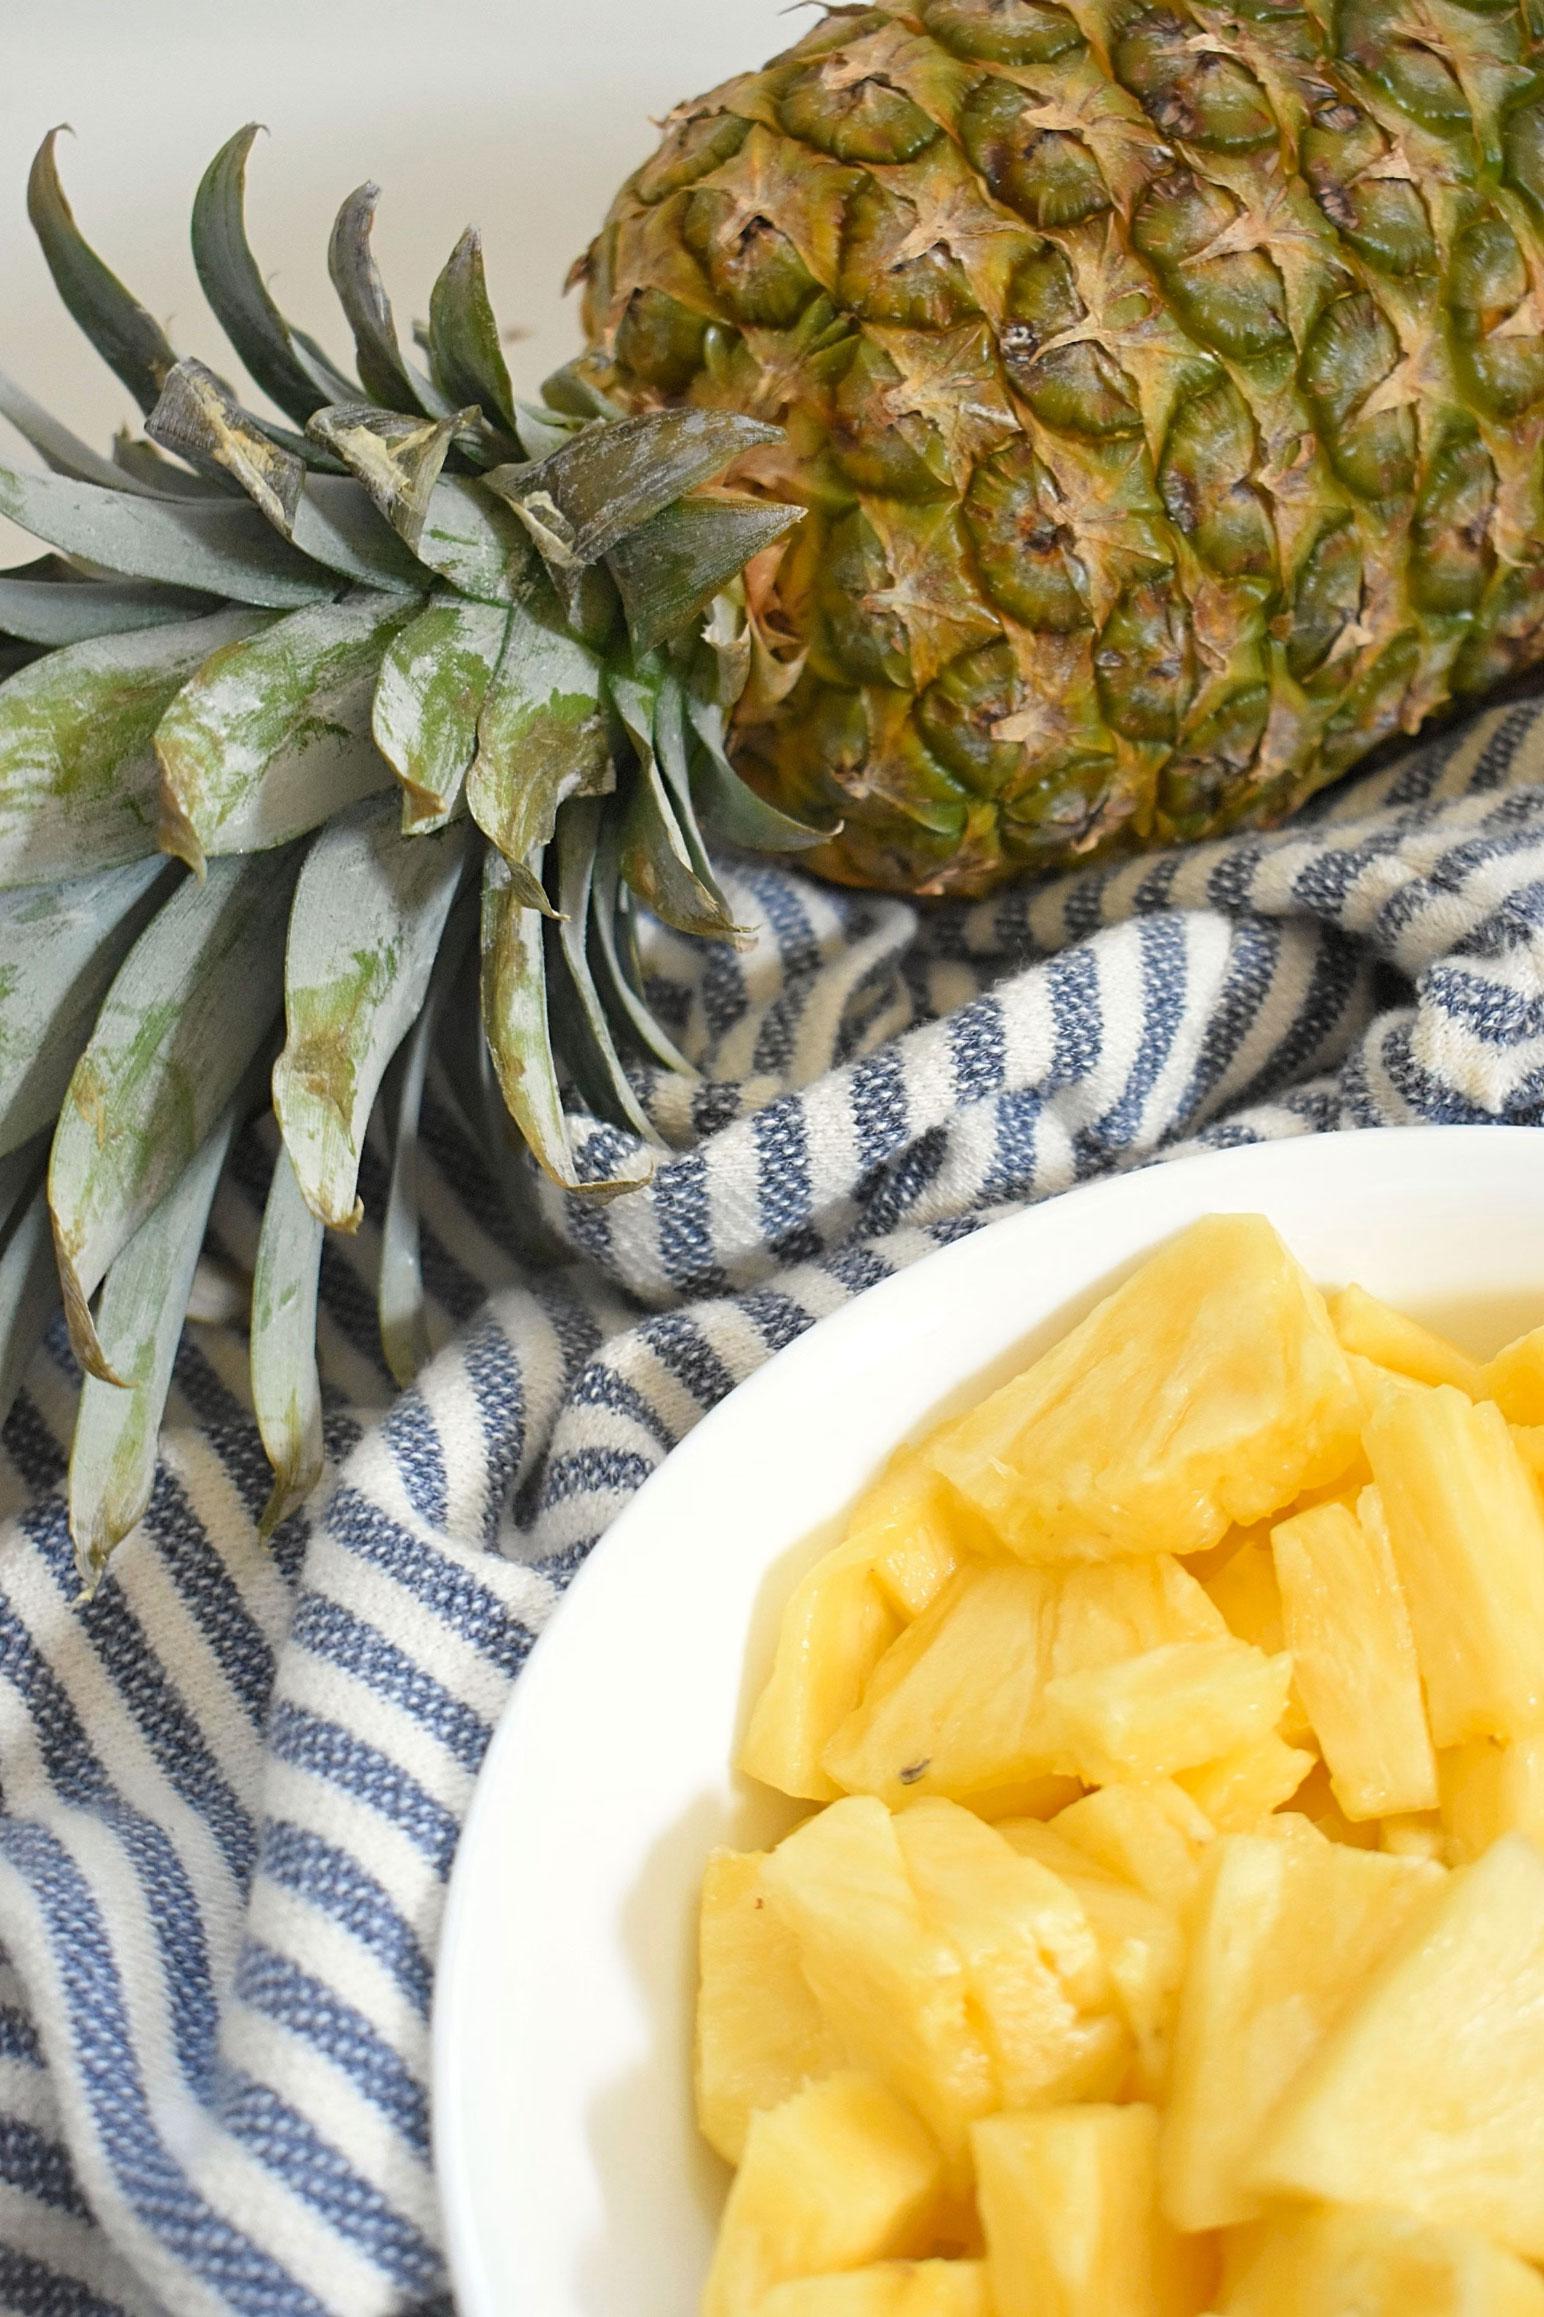 Pineapple contains a wide range of vitamins and minerals that help boost immunity